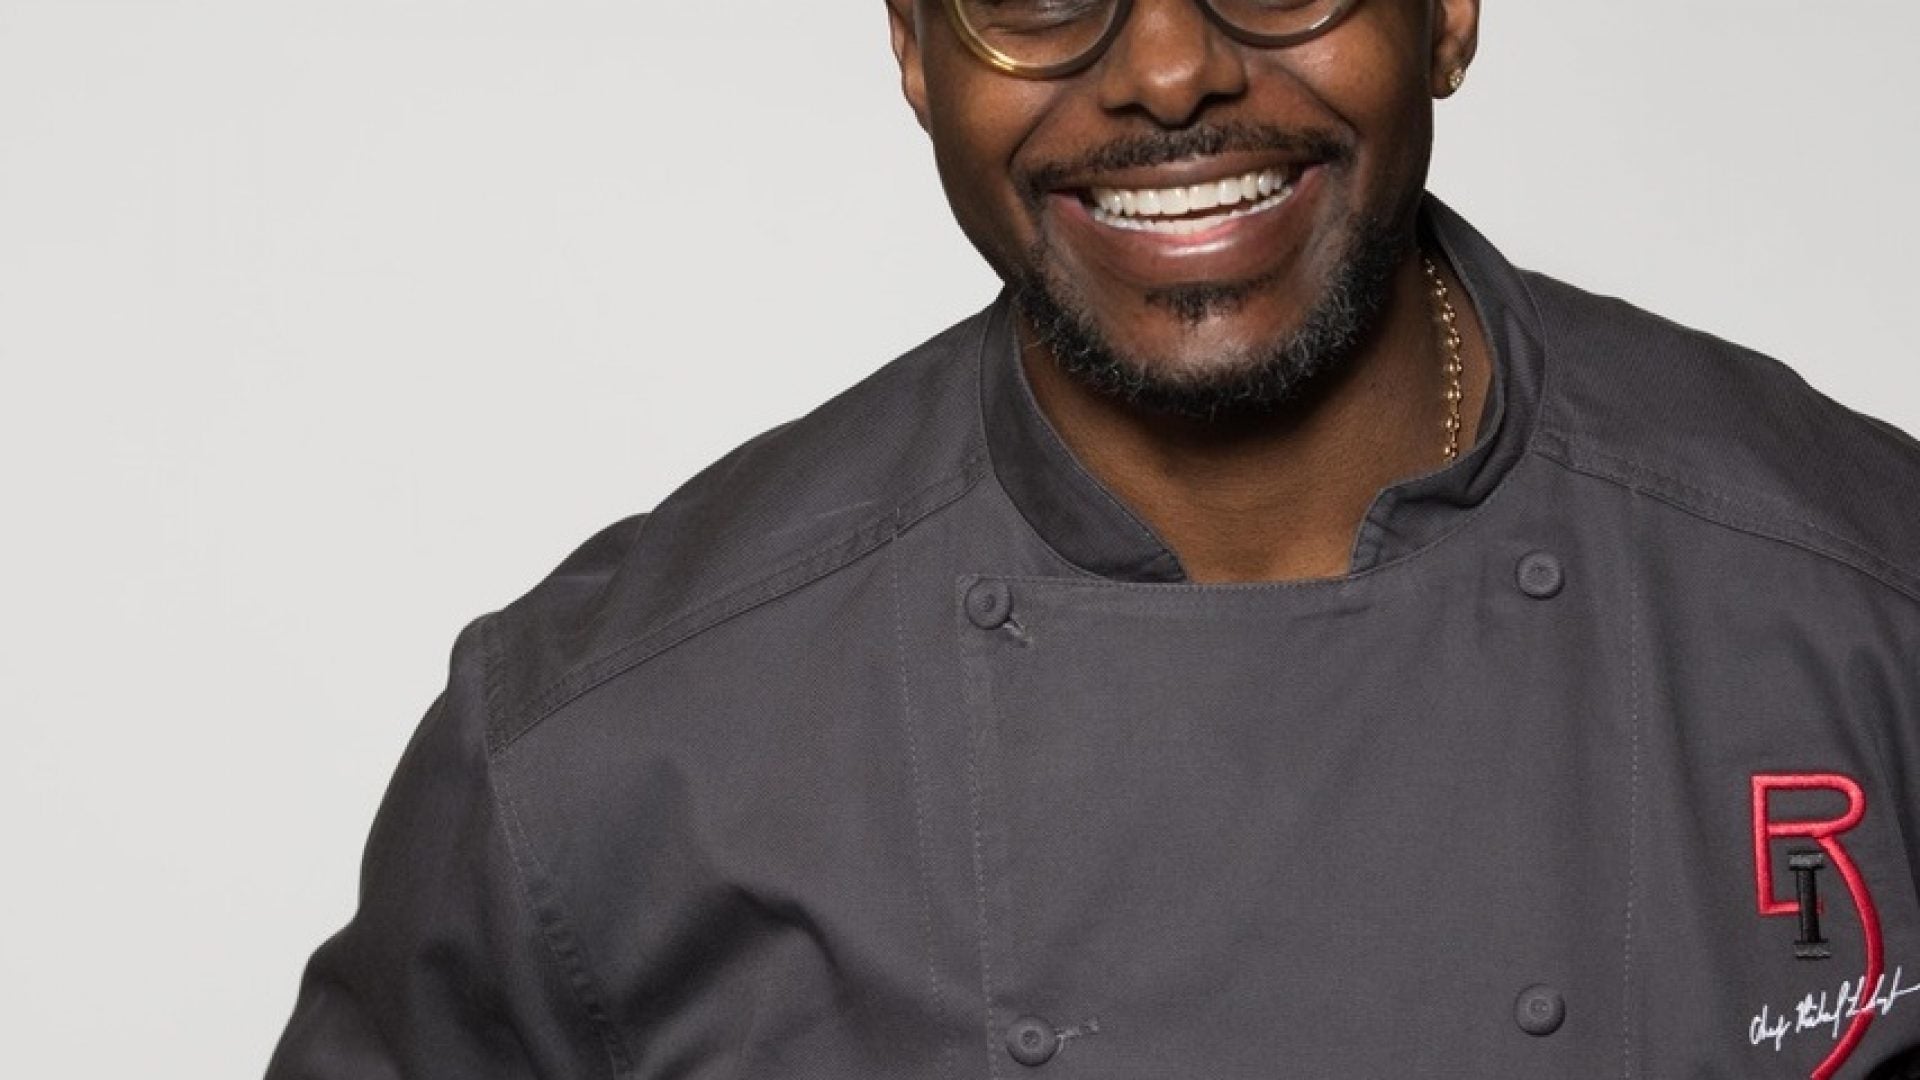 Chef Richard Dishes On How A Leap Of Faith Led Him To Cooking For One Of The NBA's Biggest Stars